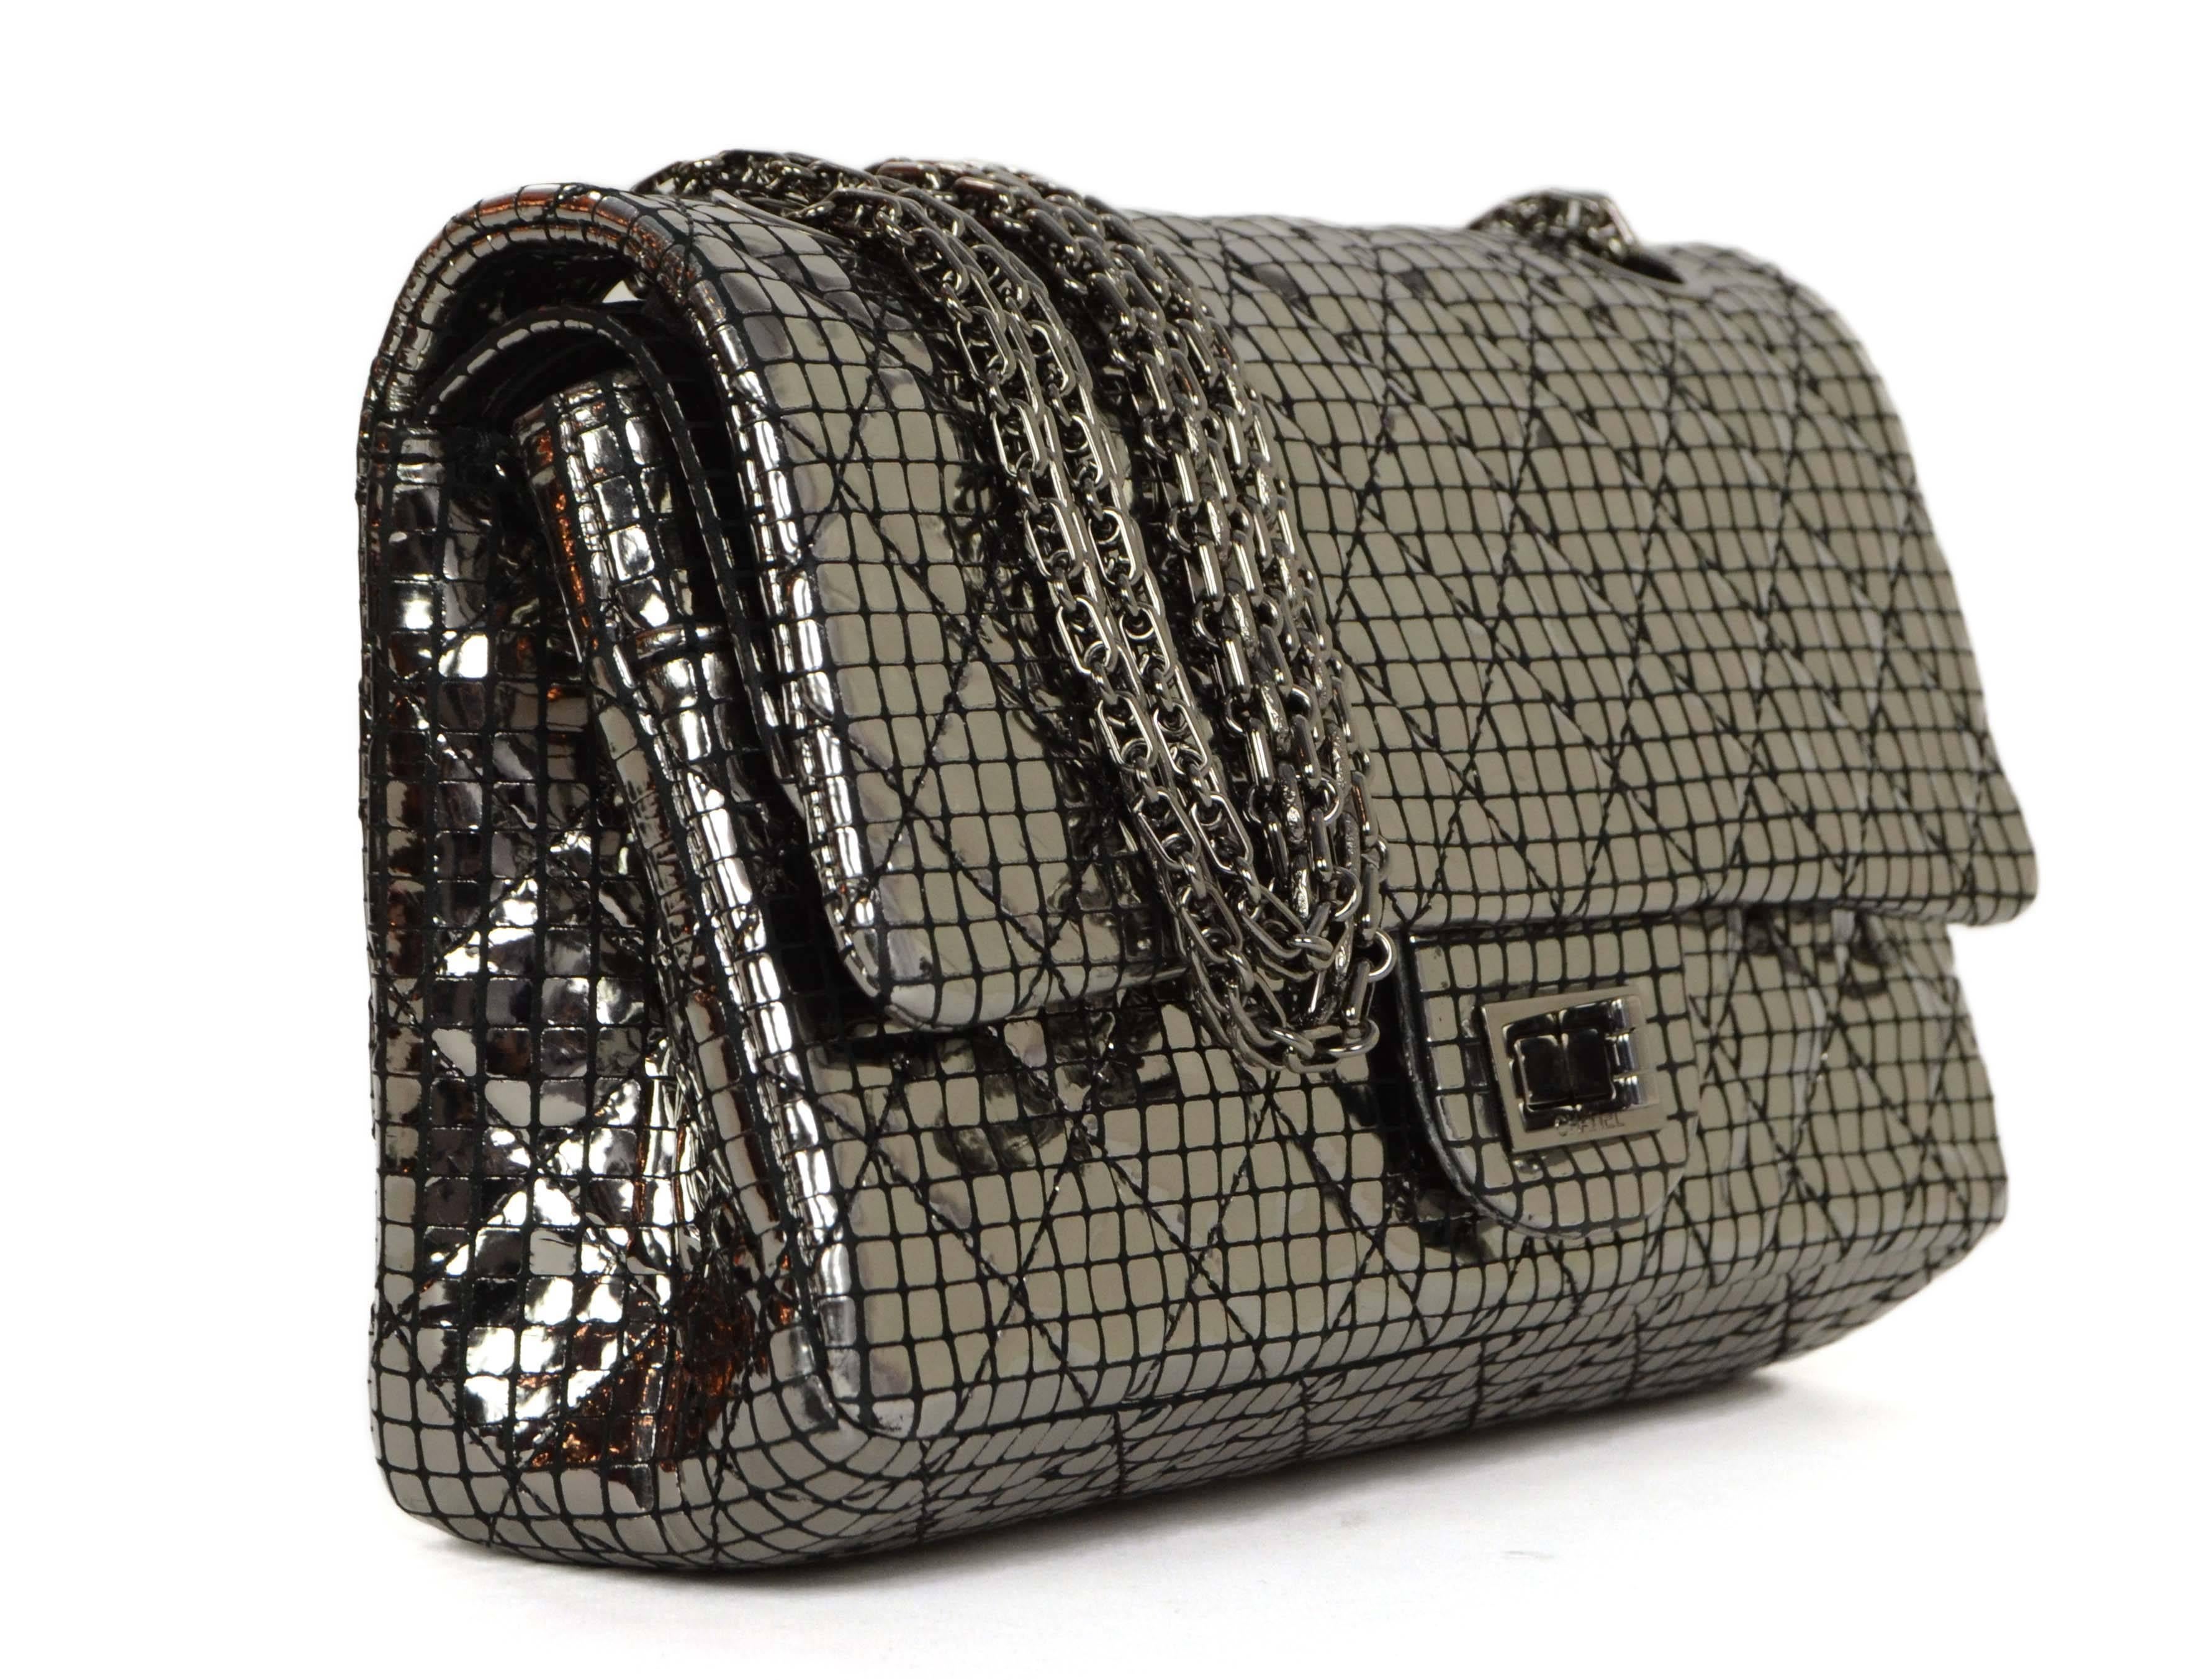 Chanel Silver Mirror 2.55 Re-Issue Double Flap Bag
Made In: France
Year of Production: 2012
Color: Silver mirror
Hardware: Ruthenium
Materials: Textile and metal
Lining: Black leather
Closure/Opening: Double flap top with snap and twist lock